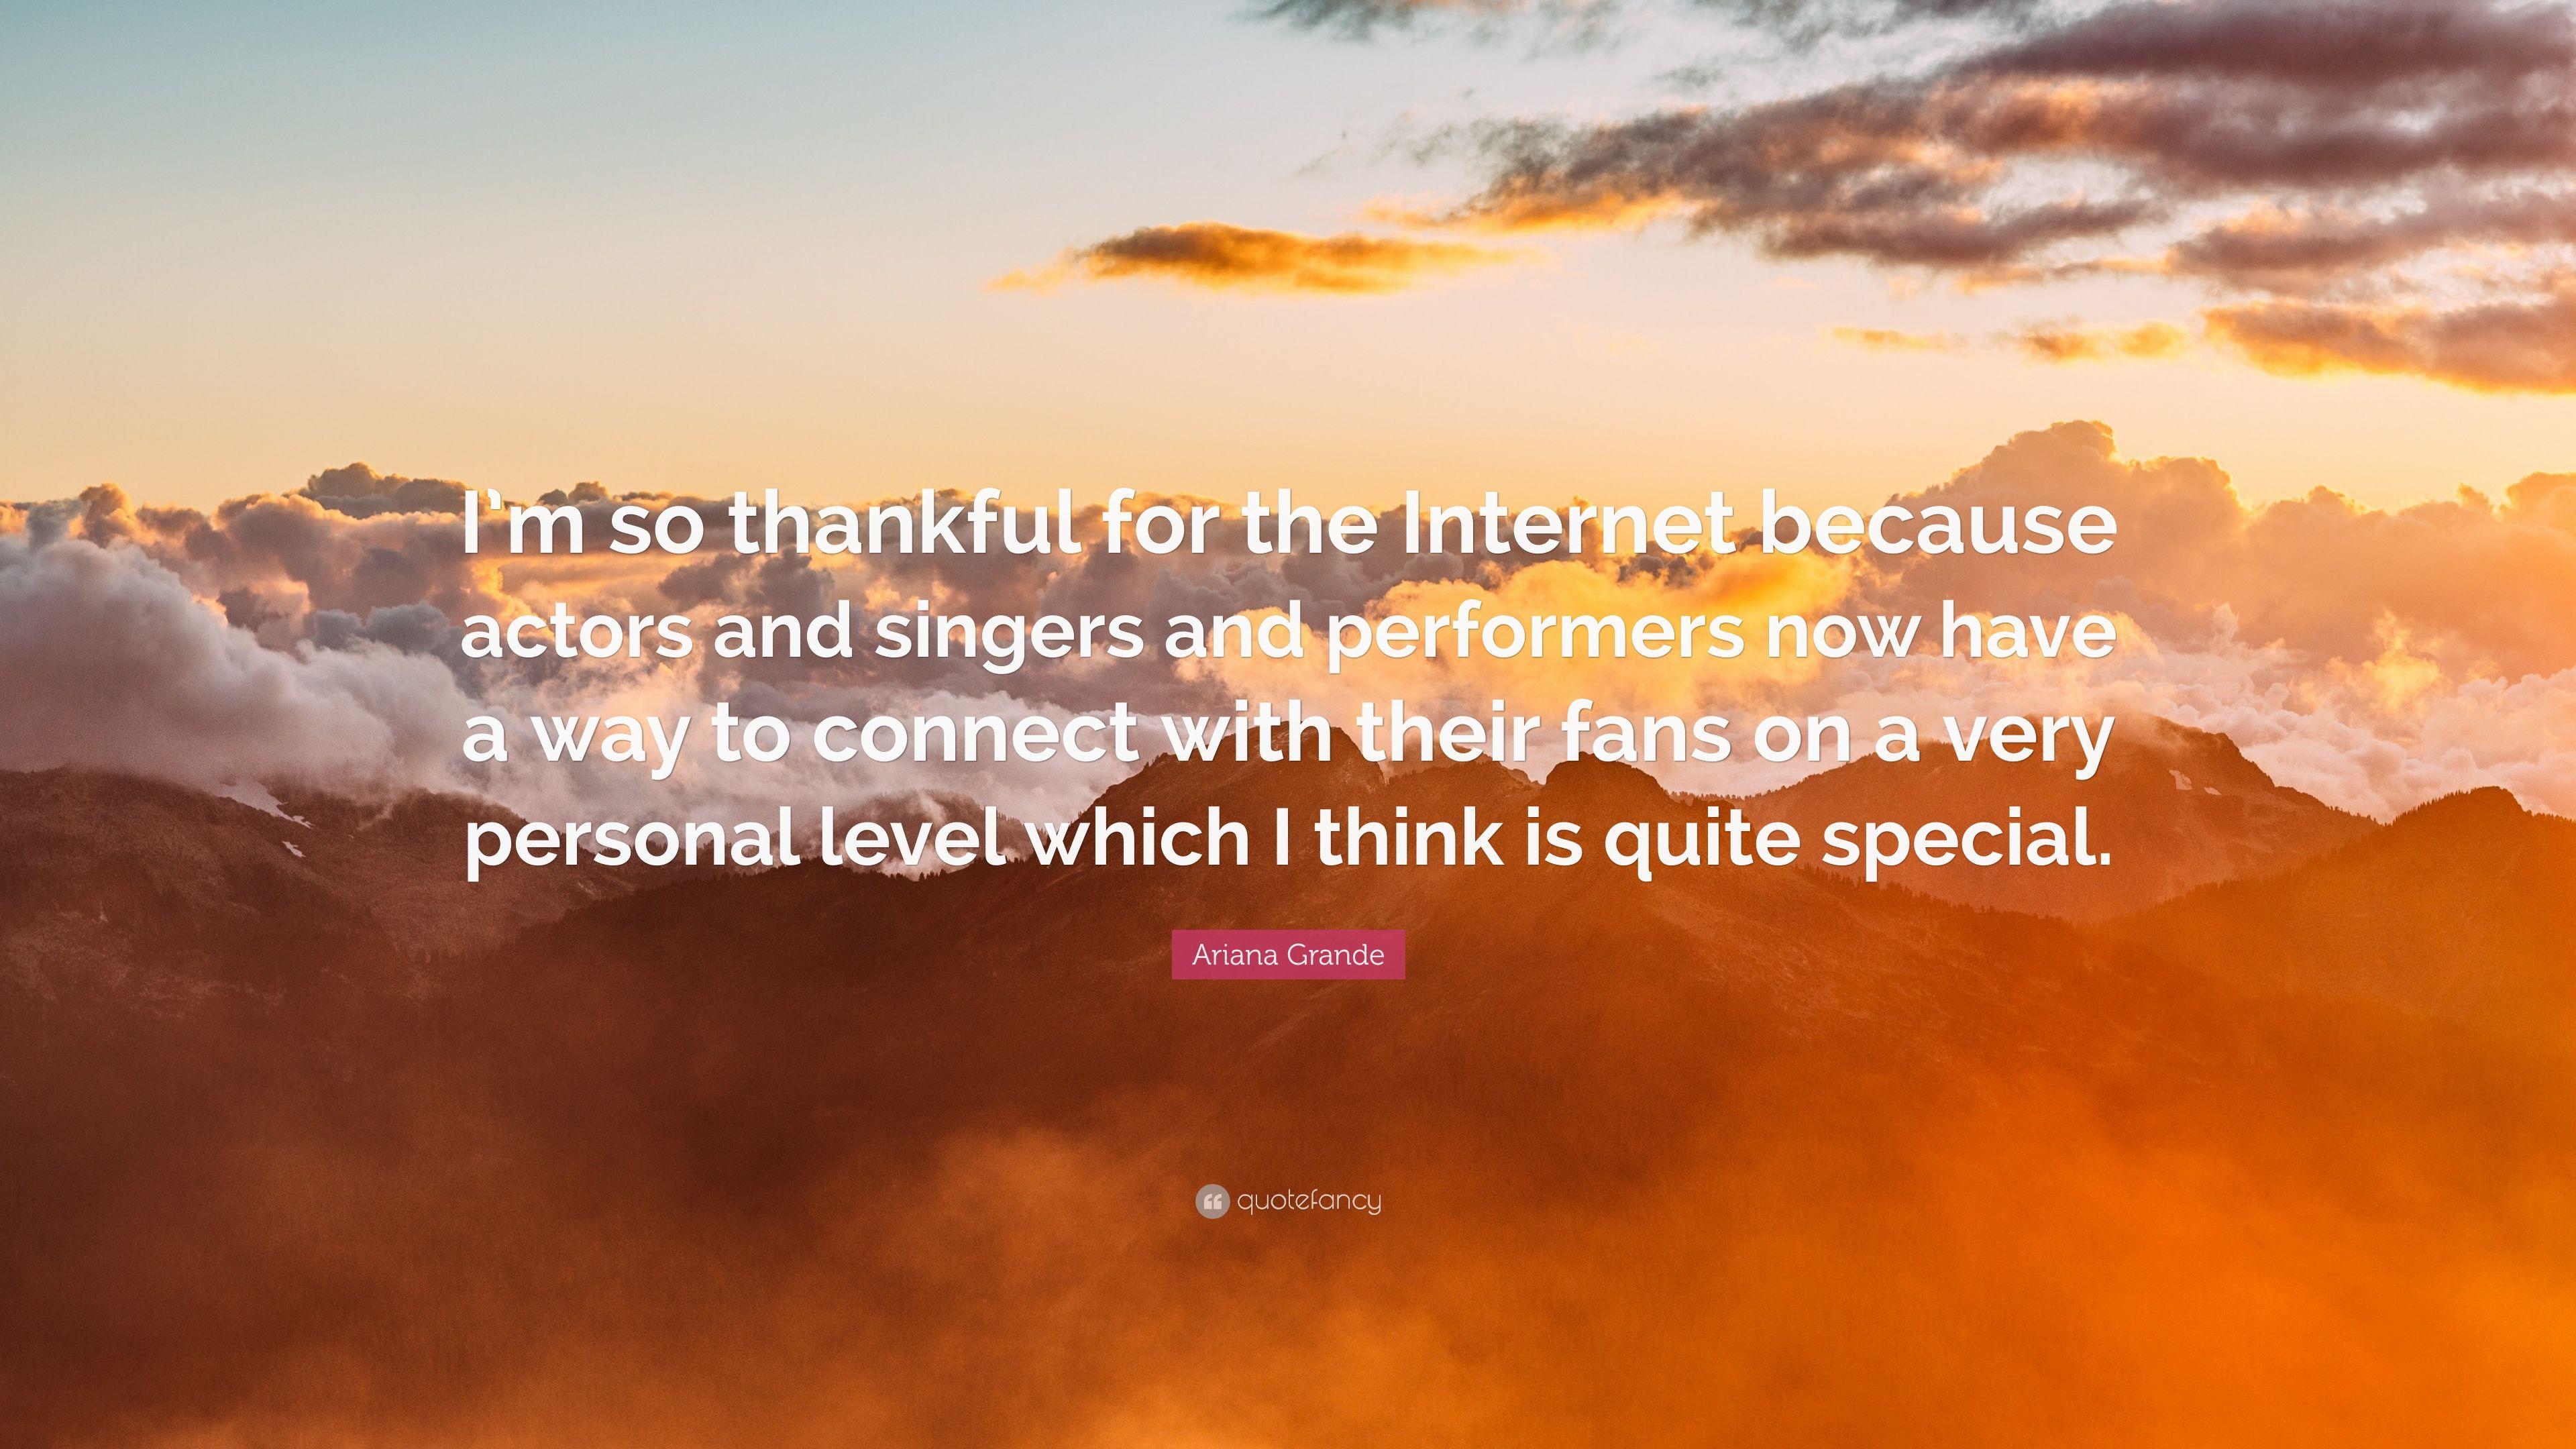 Ariana Grande Quote: “I'm so thankful for the Internet because